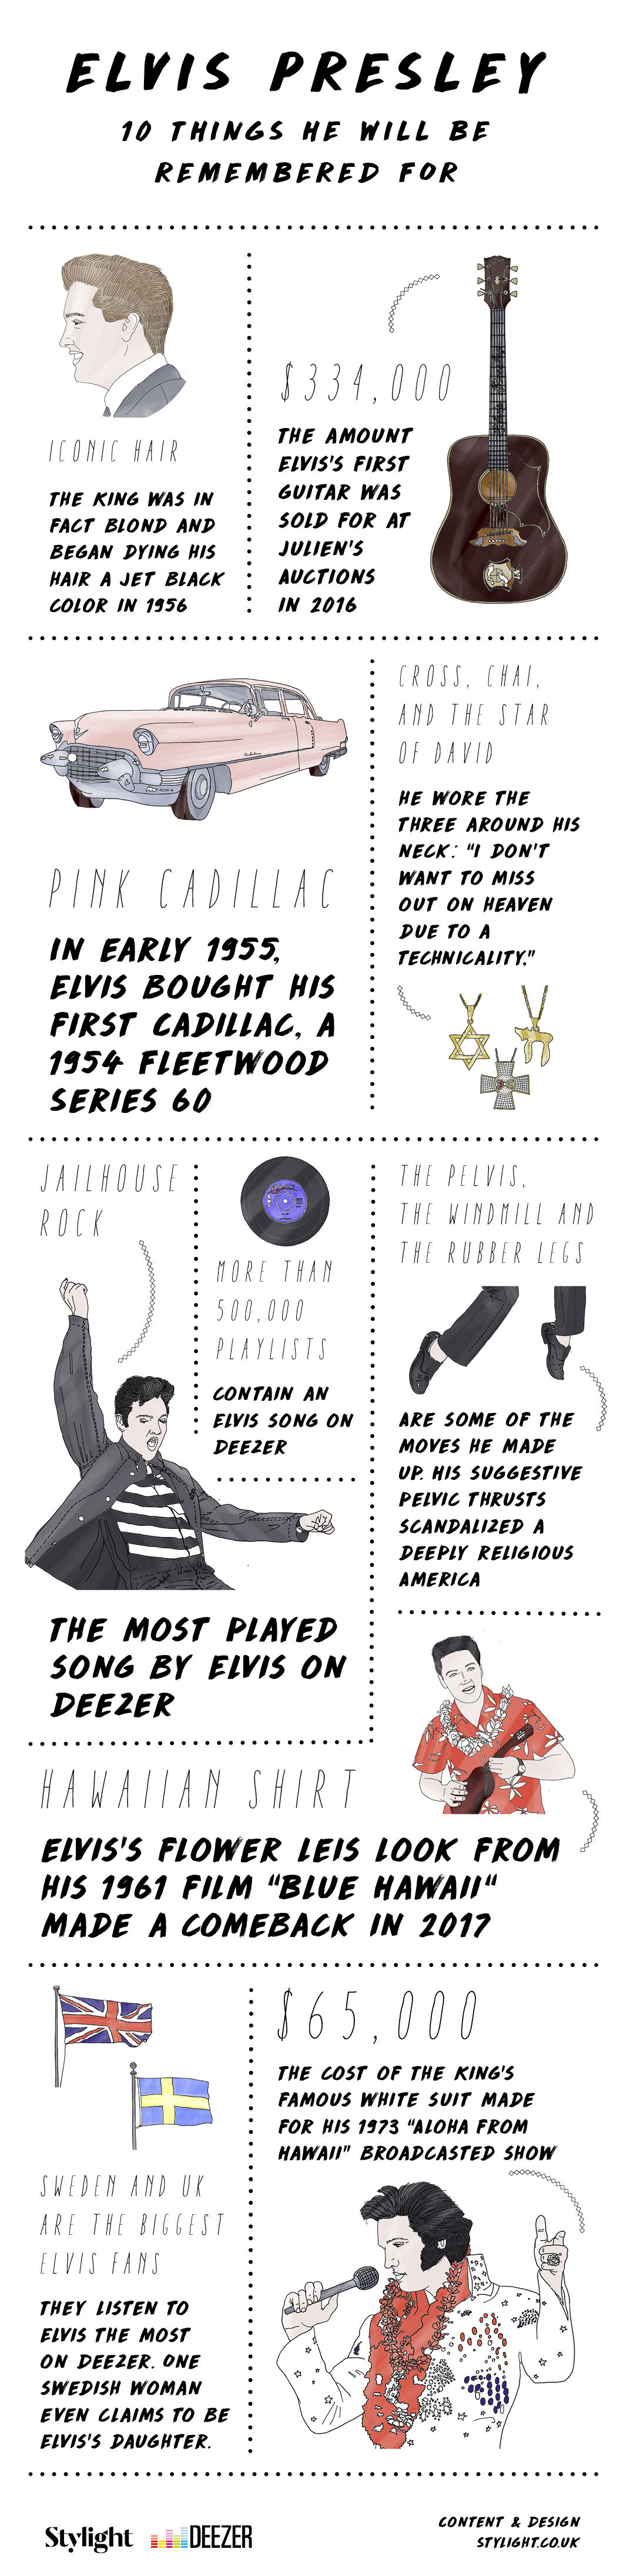 Elvis Presley Infographic things you didn't know